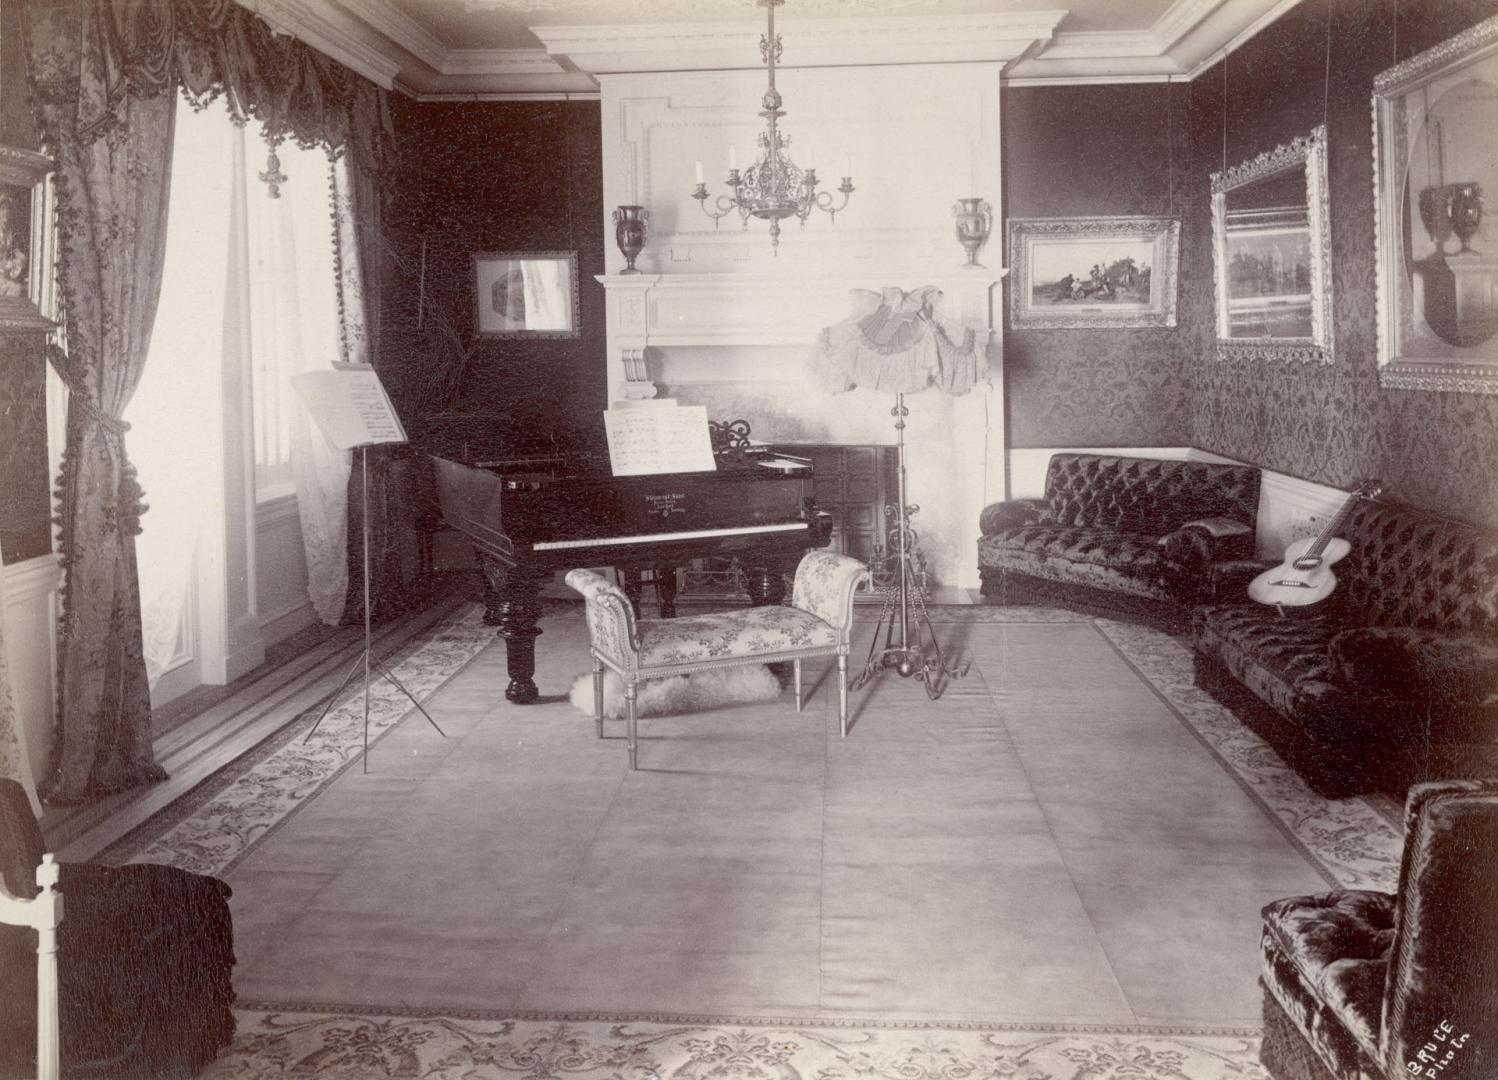 Image shows a music room that has a baby grand piano, music stand and a few couches.